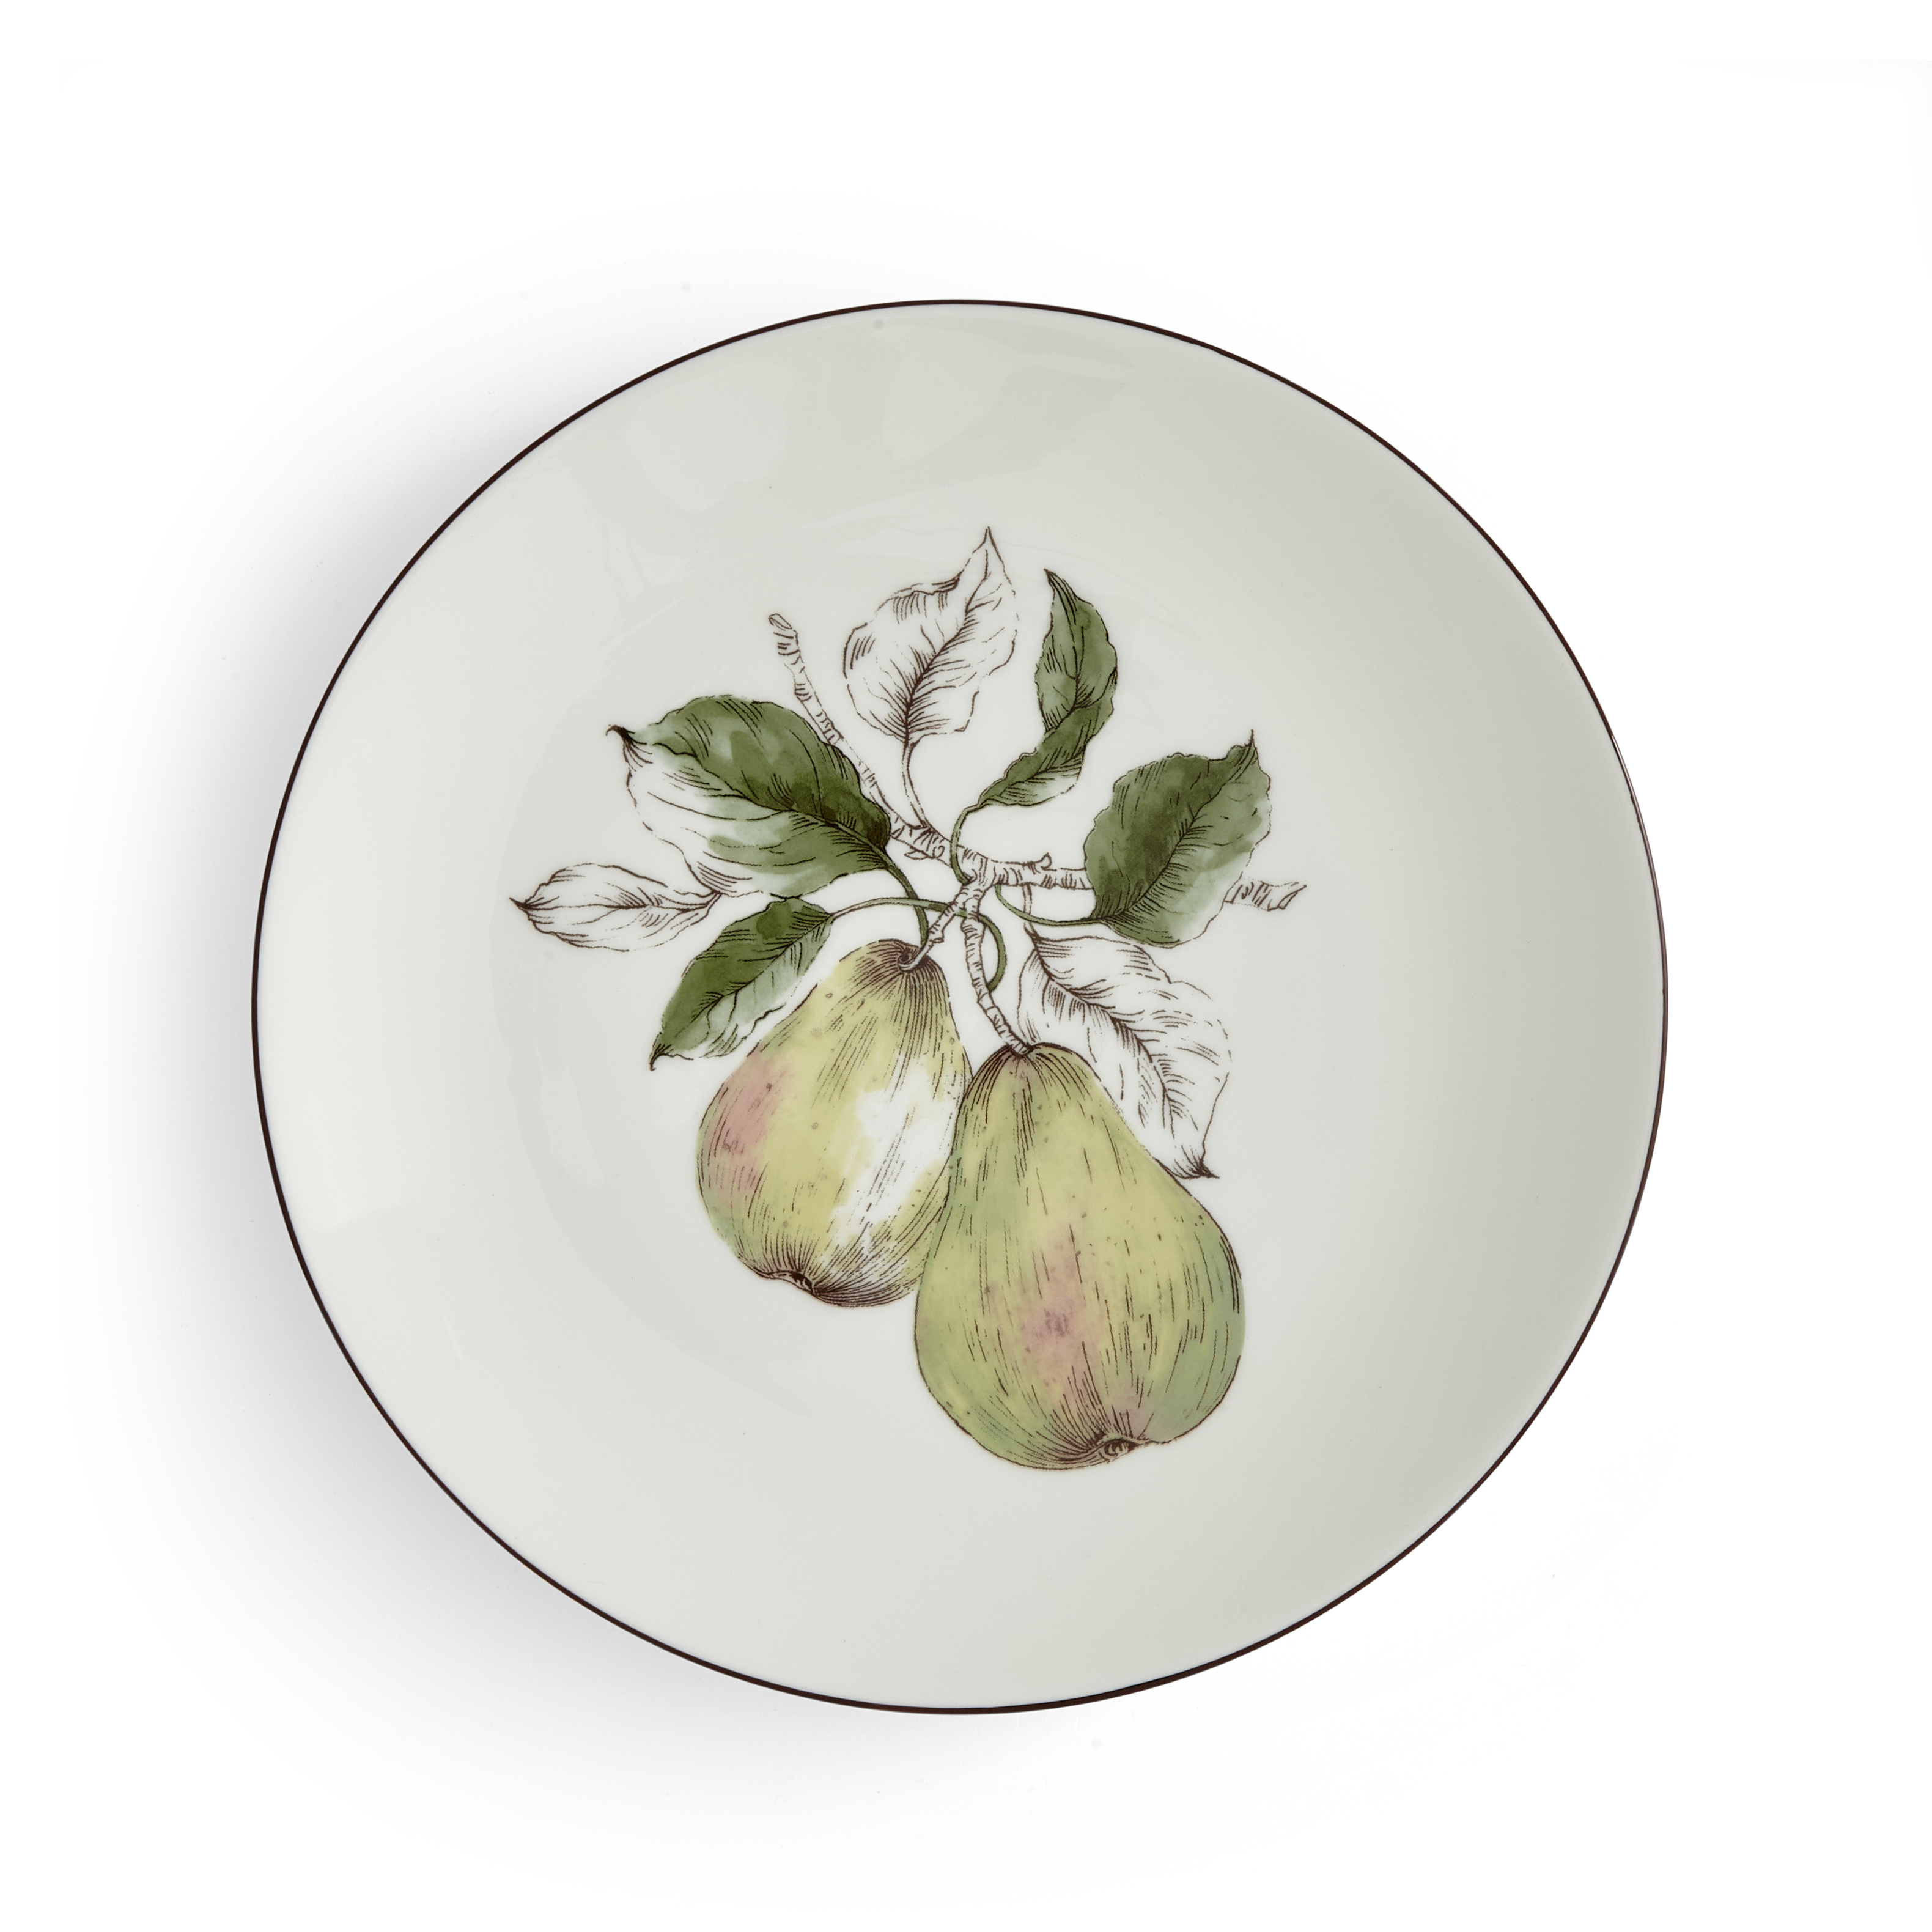 Nature's Bounty 9.5" Salad Plate (Pear) image number null